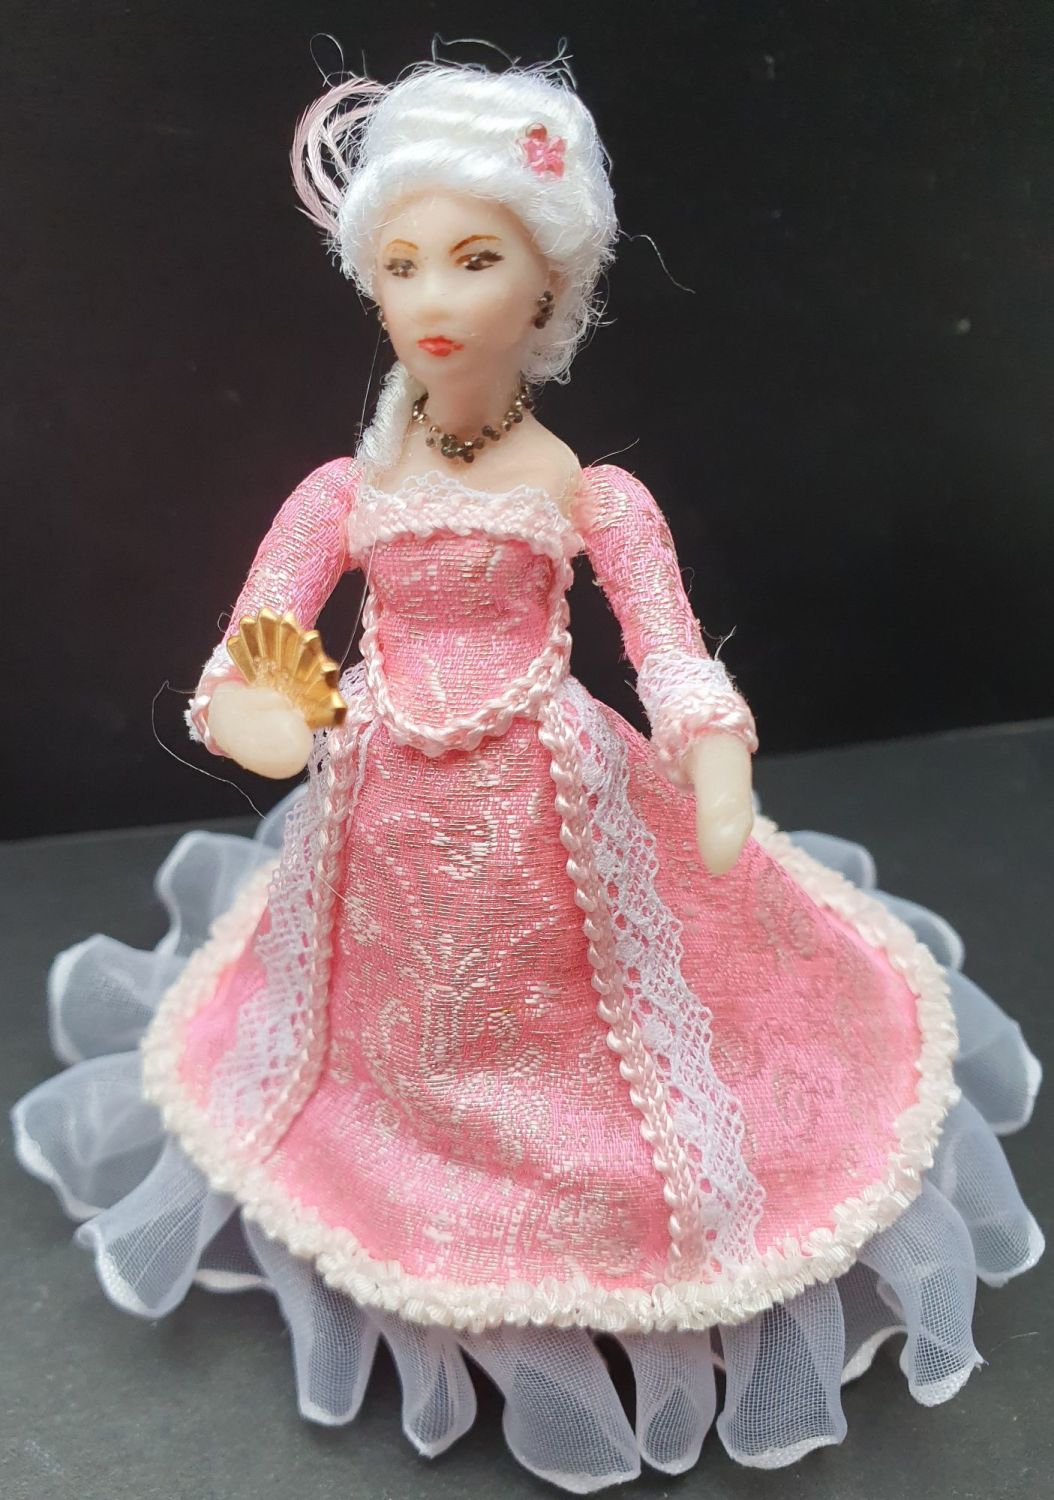 Slightly larger than 1/24th scale Georgian lady